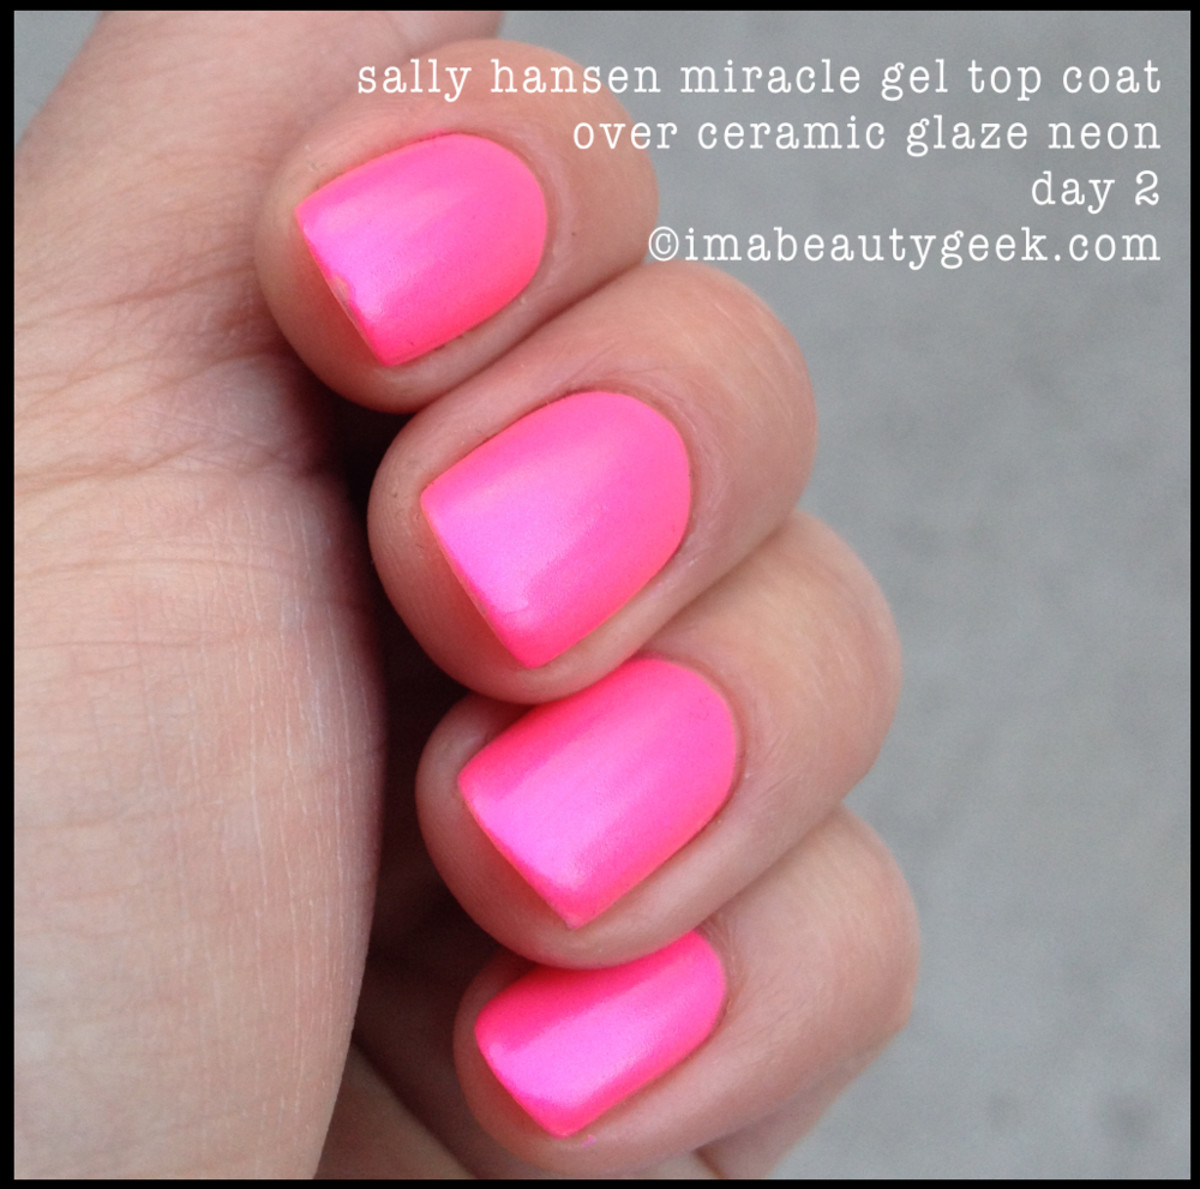 SALLY HANSEN MIRACLE GEL REVIEW + COLOR COLLECTION SWATCHES - Beautygeeks